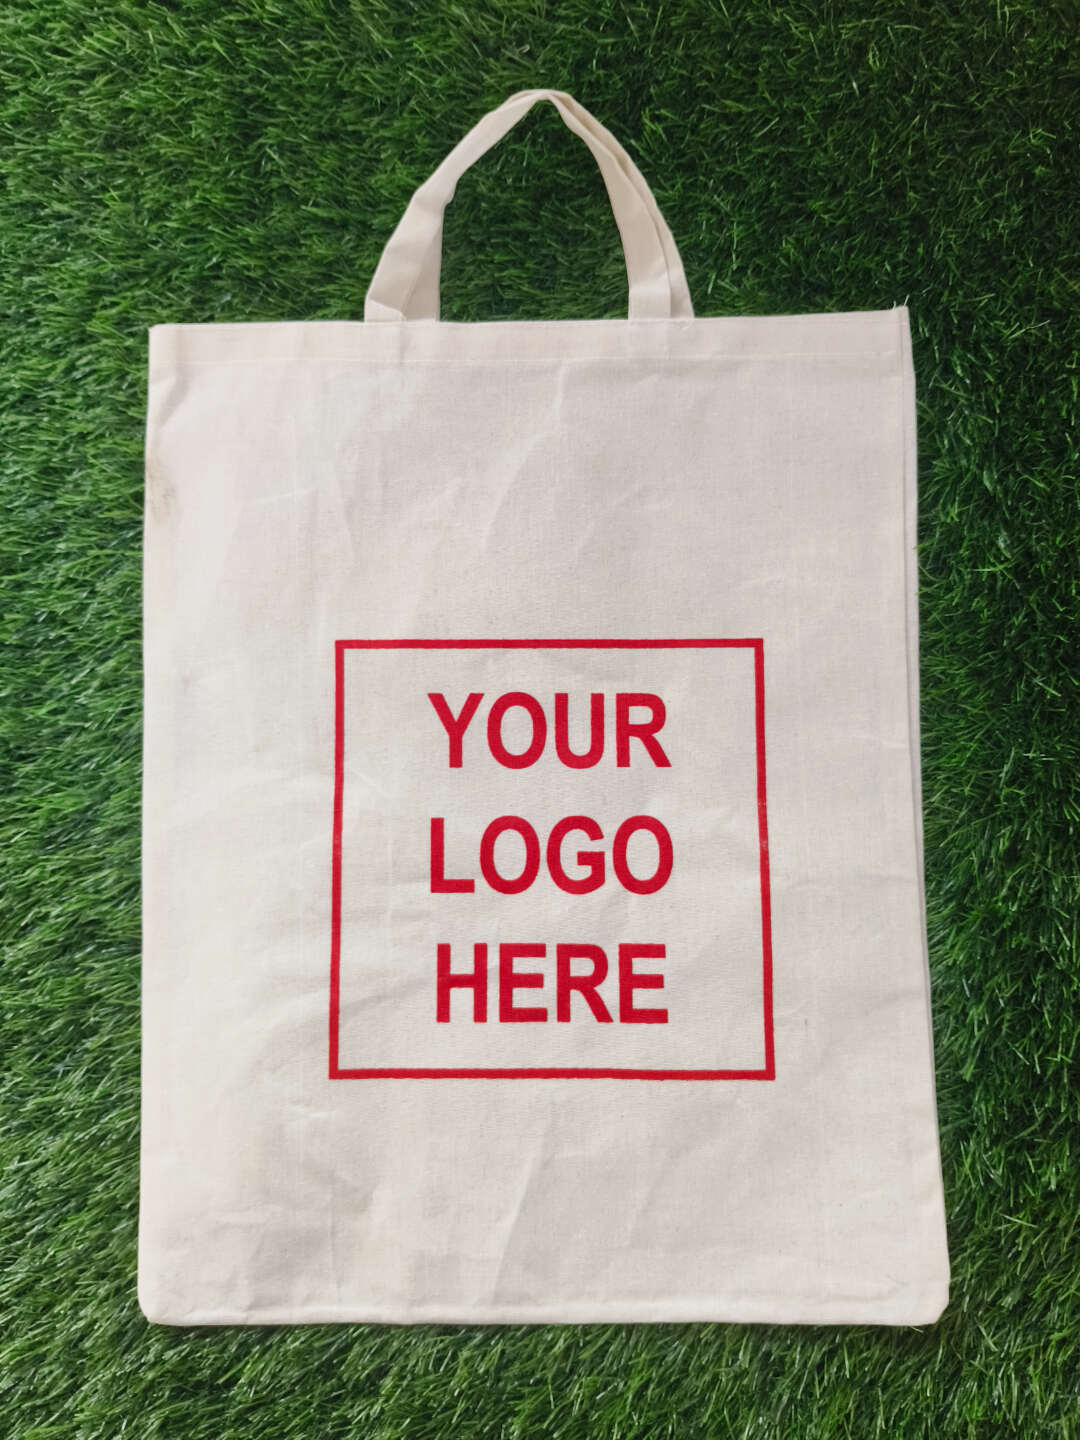 PROMOTIONAL BAGS